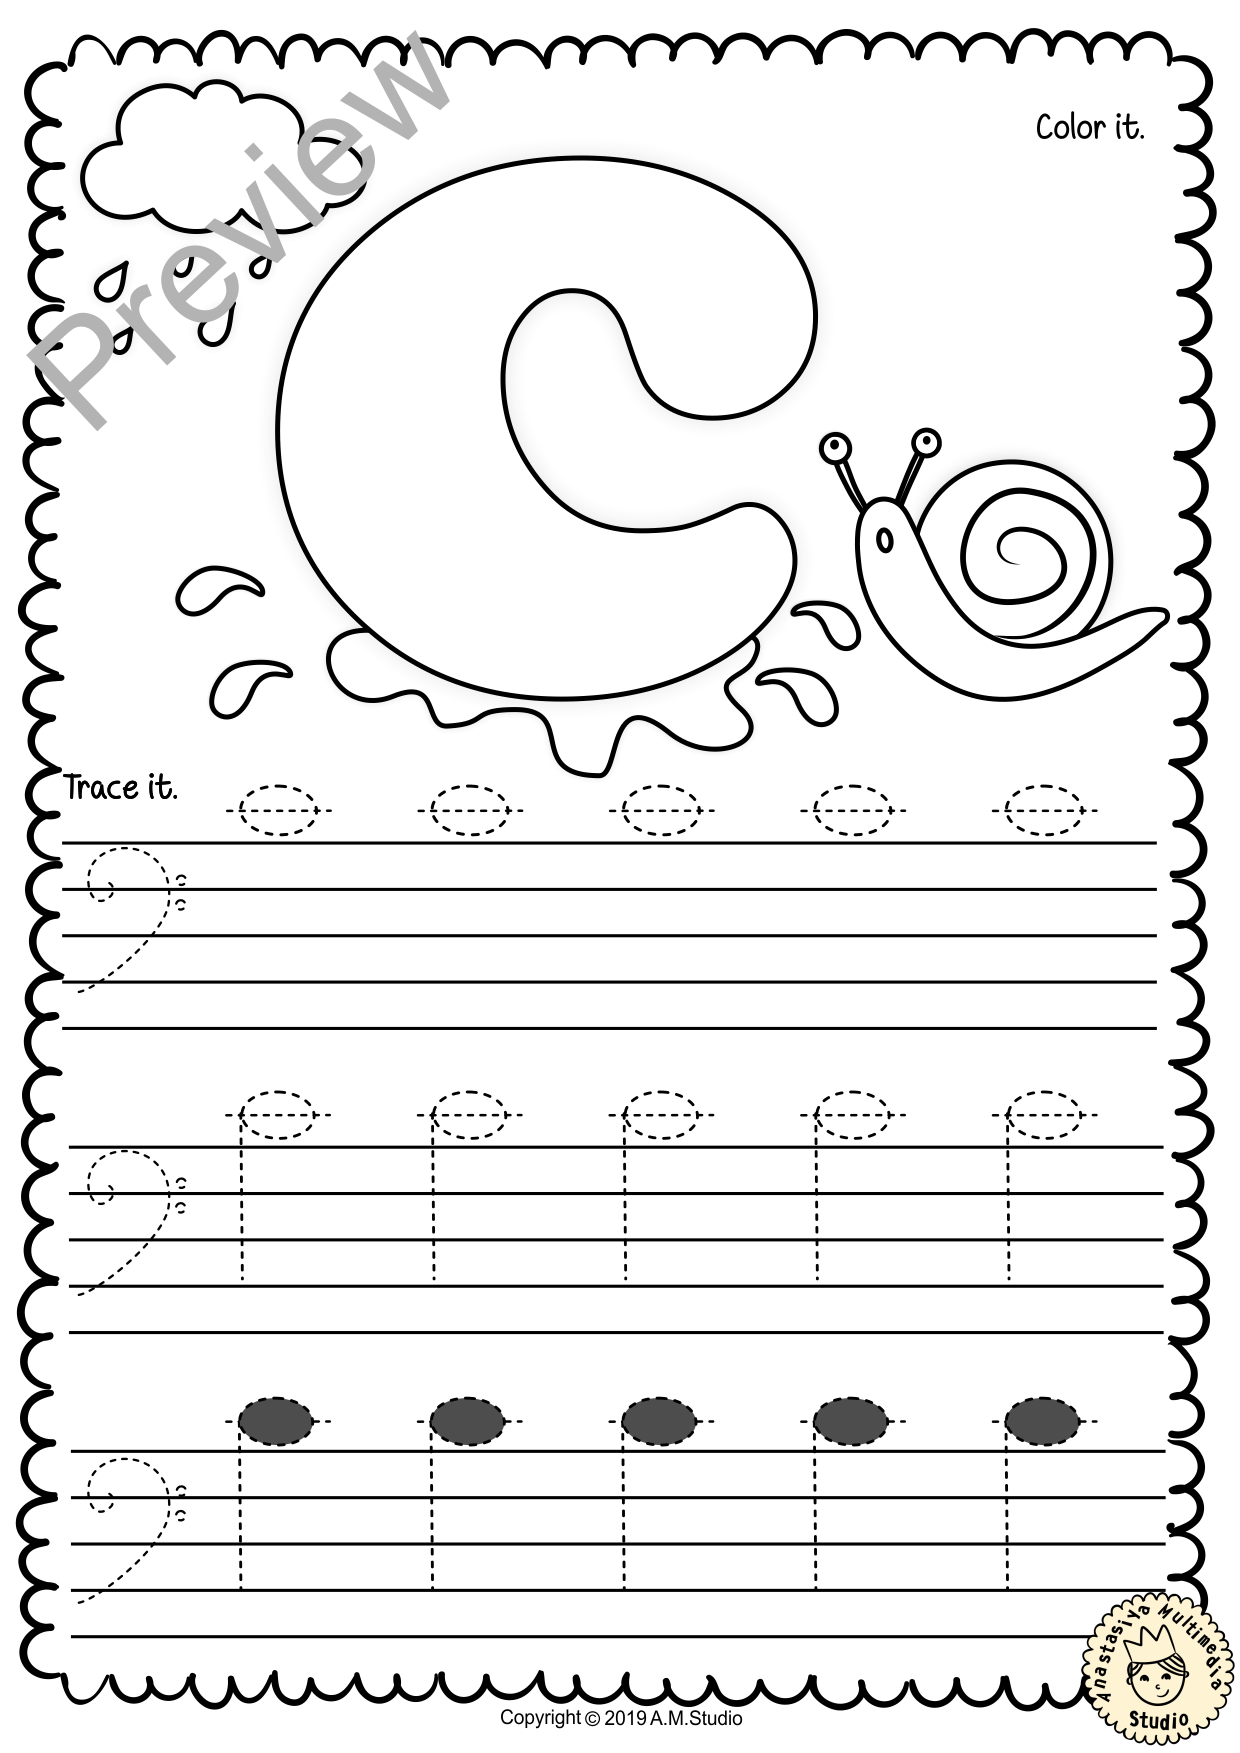 Bass Clef Tracing Music Notes Worksheets for Spring (img # 3)